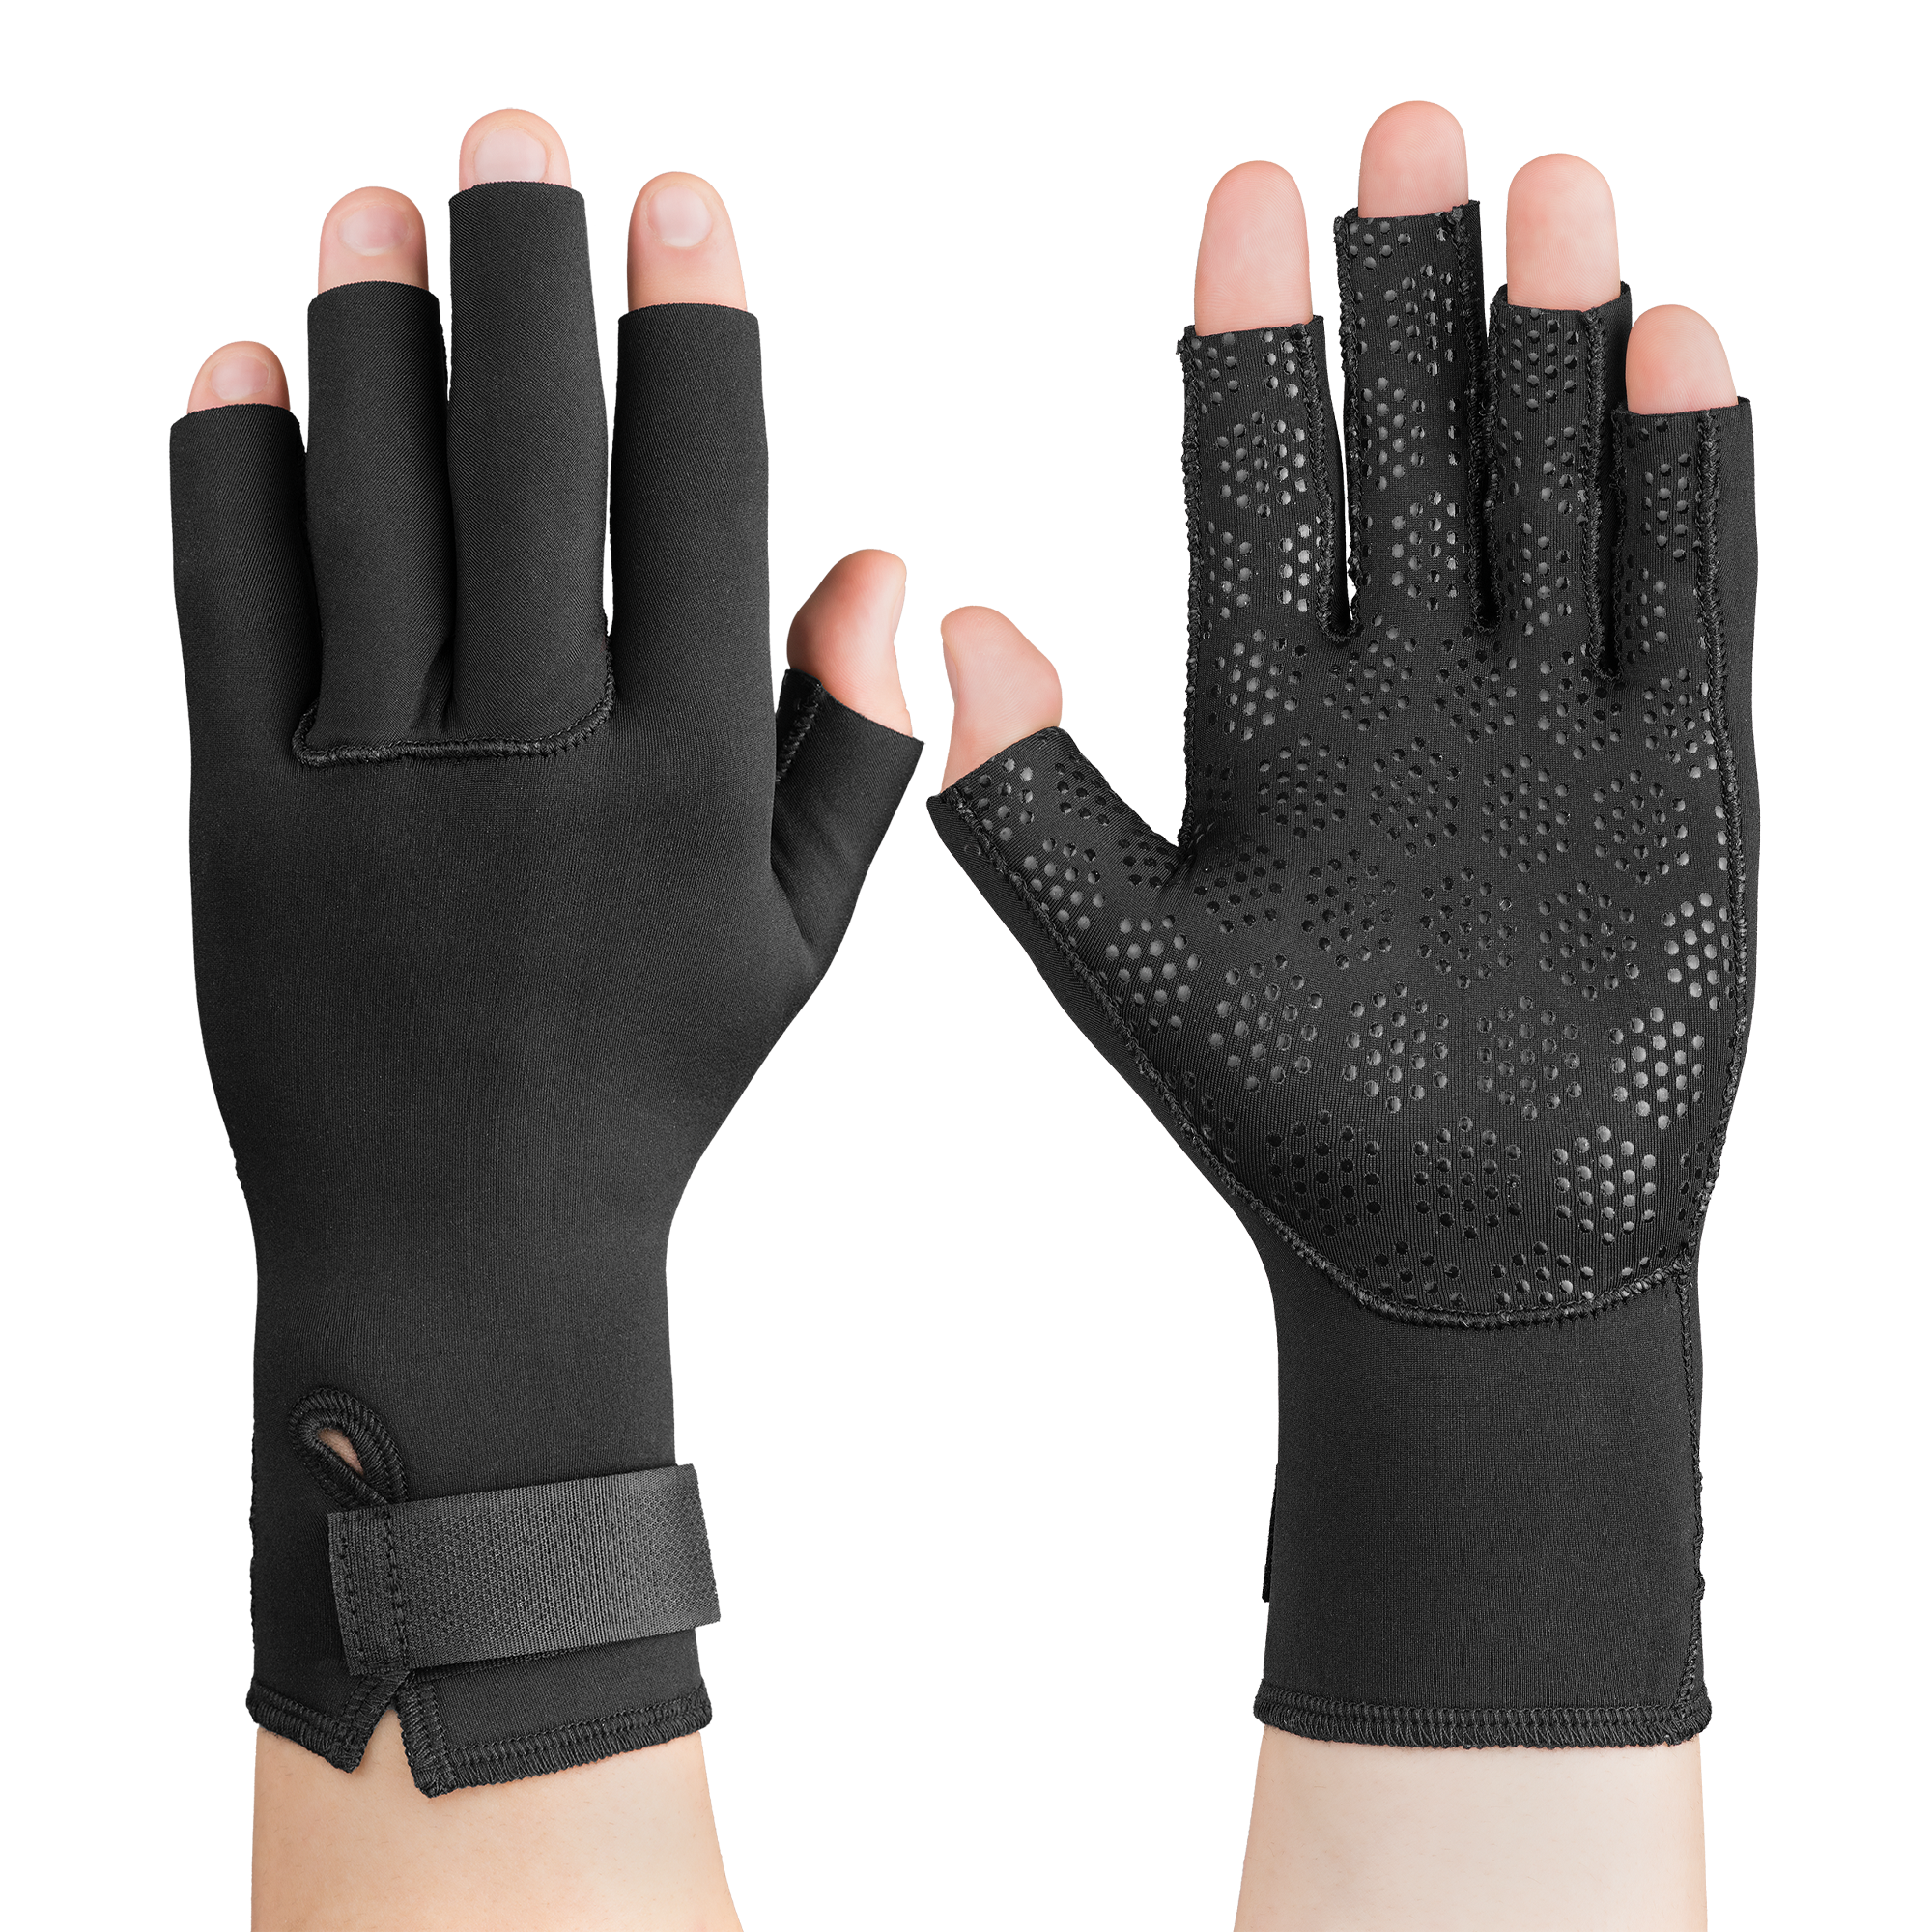 Swede-O Thermal Arthritic Gloves (pair)